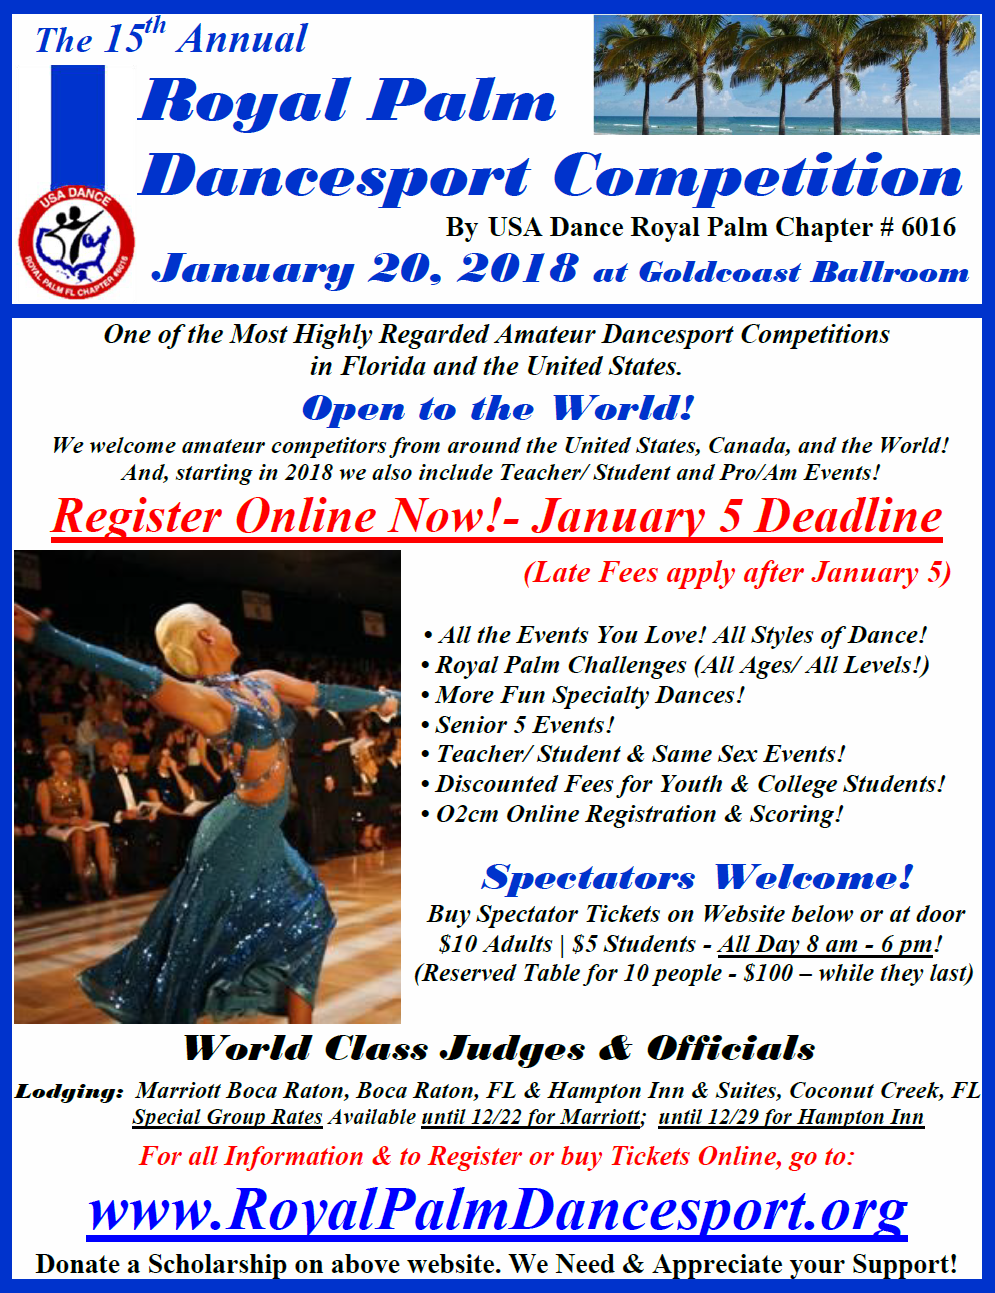 15th Annual USA Dance Royal Palm Dancesport Competition - January 20, 2017 at Goldcoast Ballroom! - Register or Buy Spectator Tickets Now!